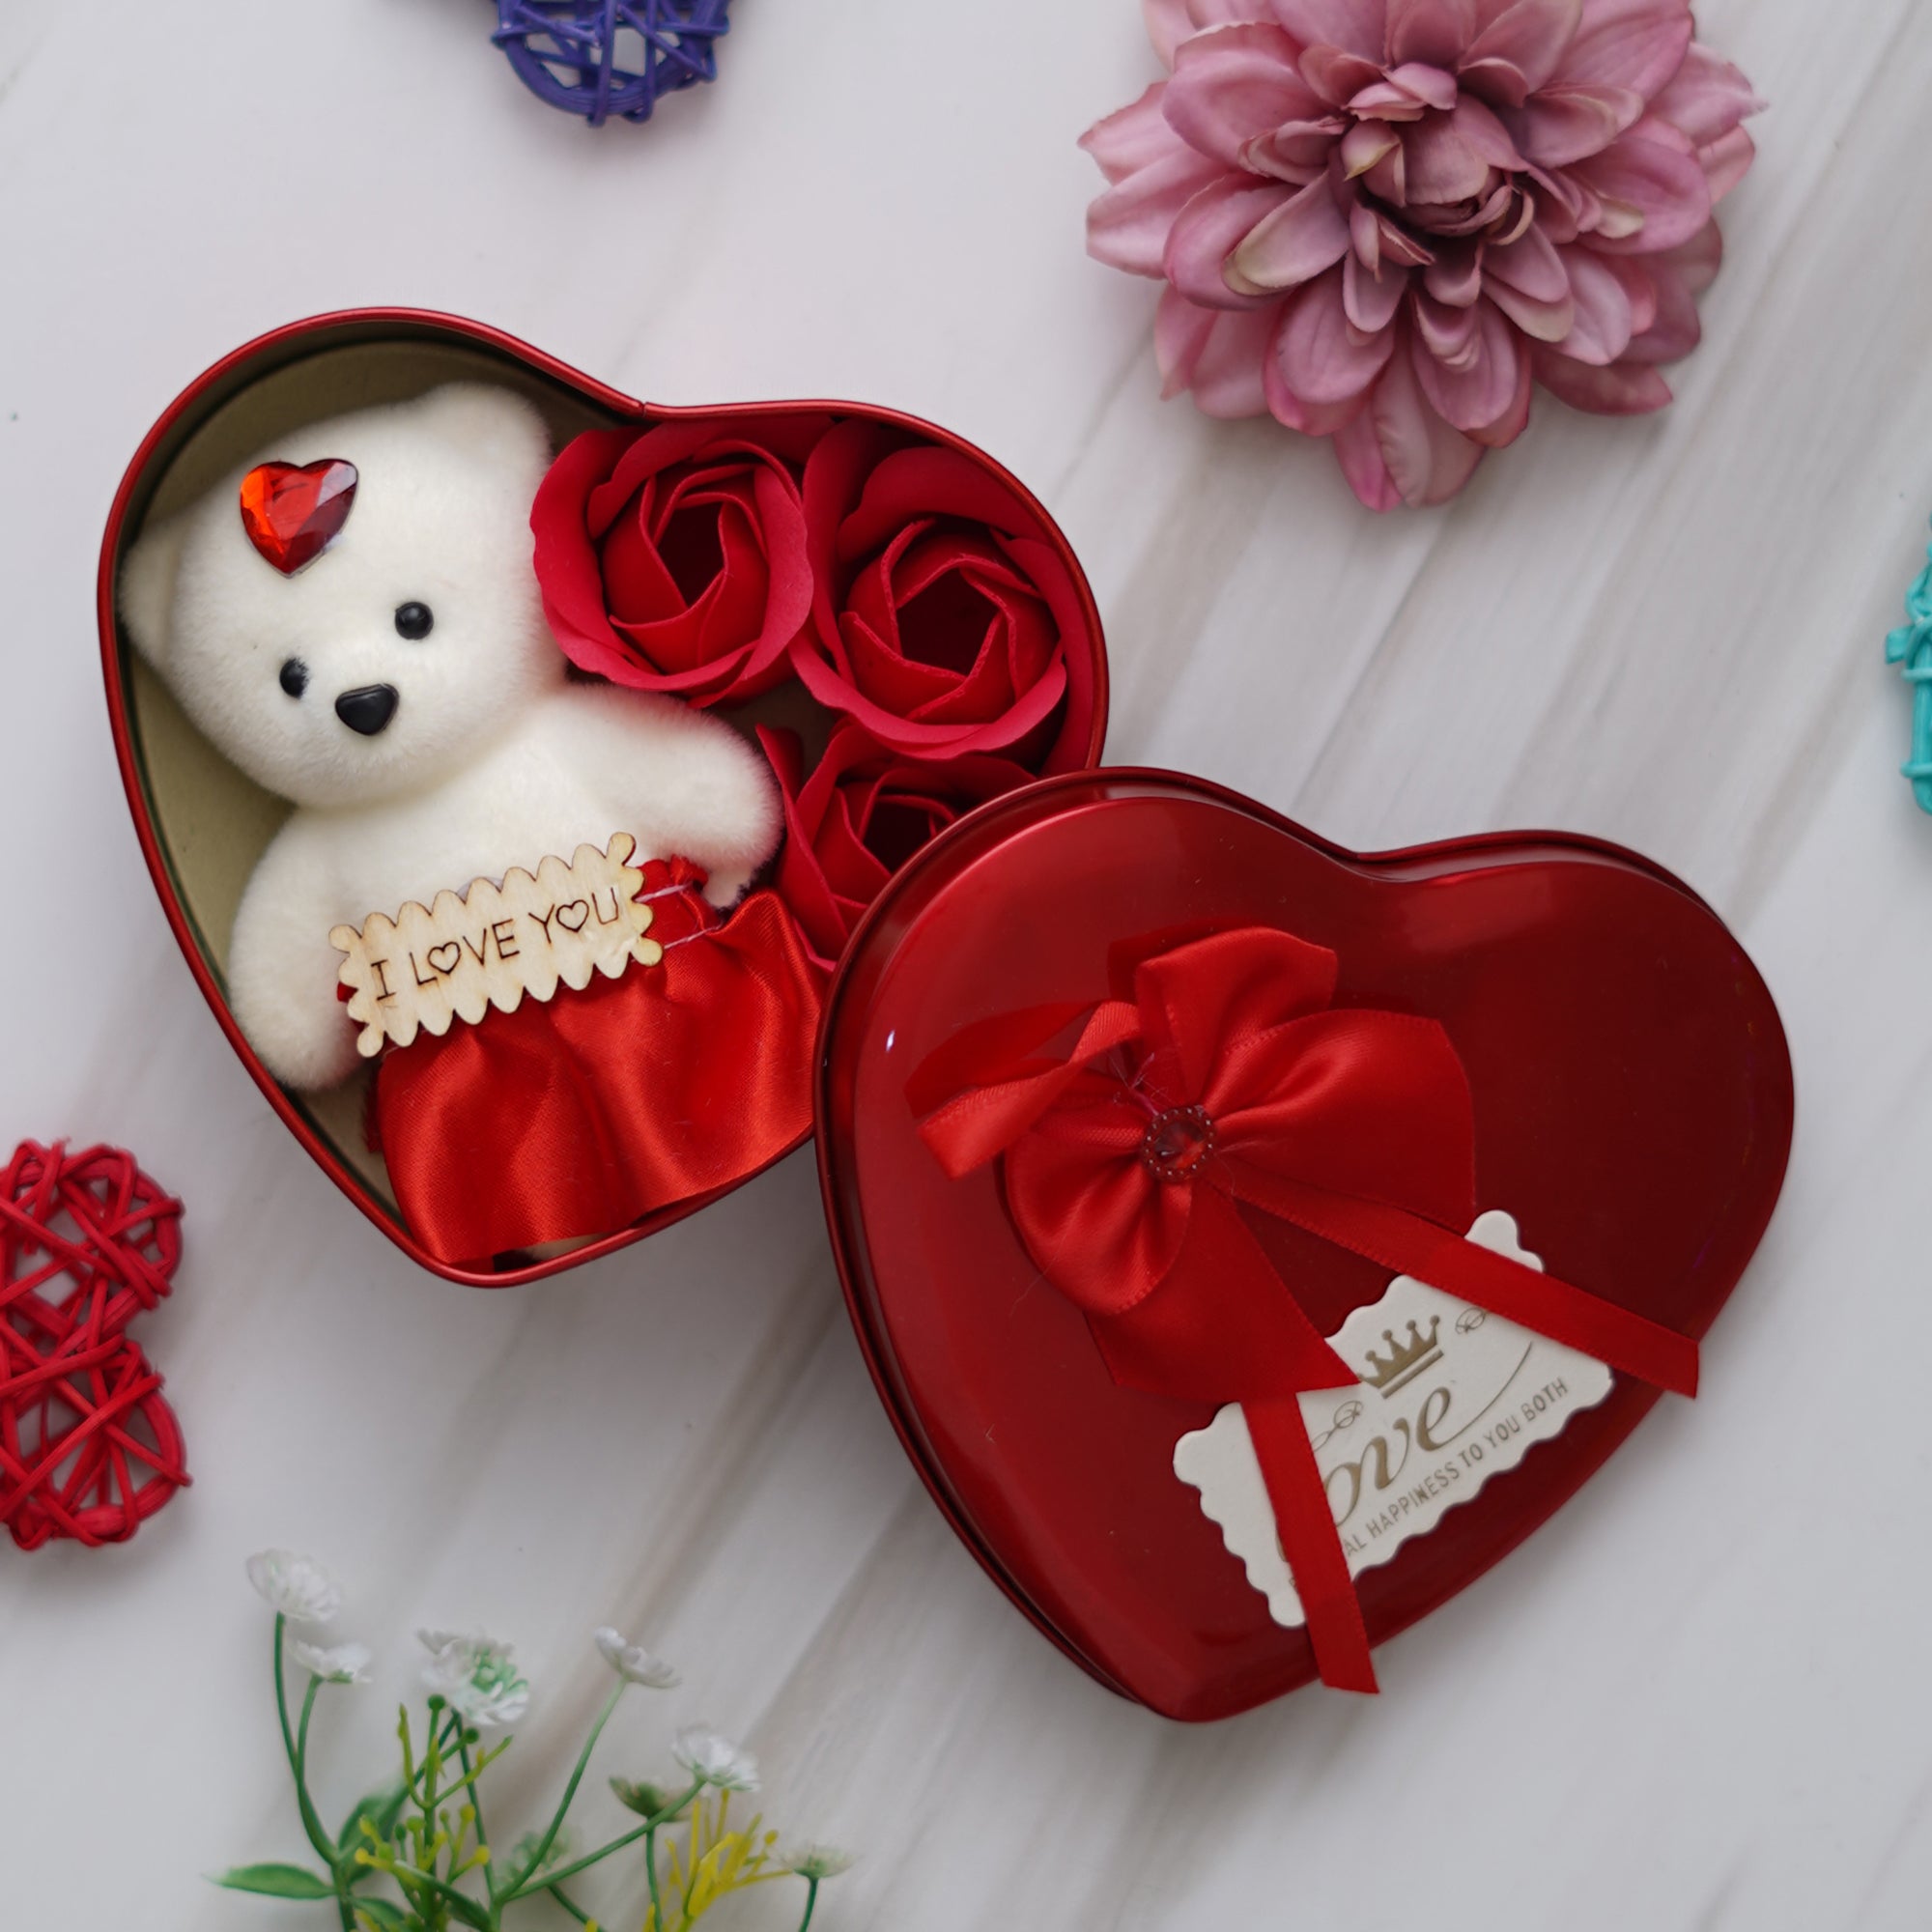 Valentine Combo of Pack of 8 Love Gift Cards, Golden Rose Gift Set, Heart Shaped Gift Box Set with White Teddy and Red Roses 5